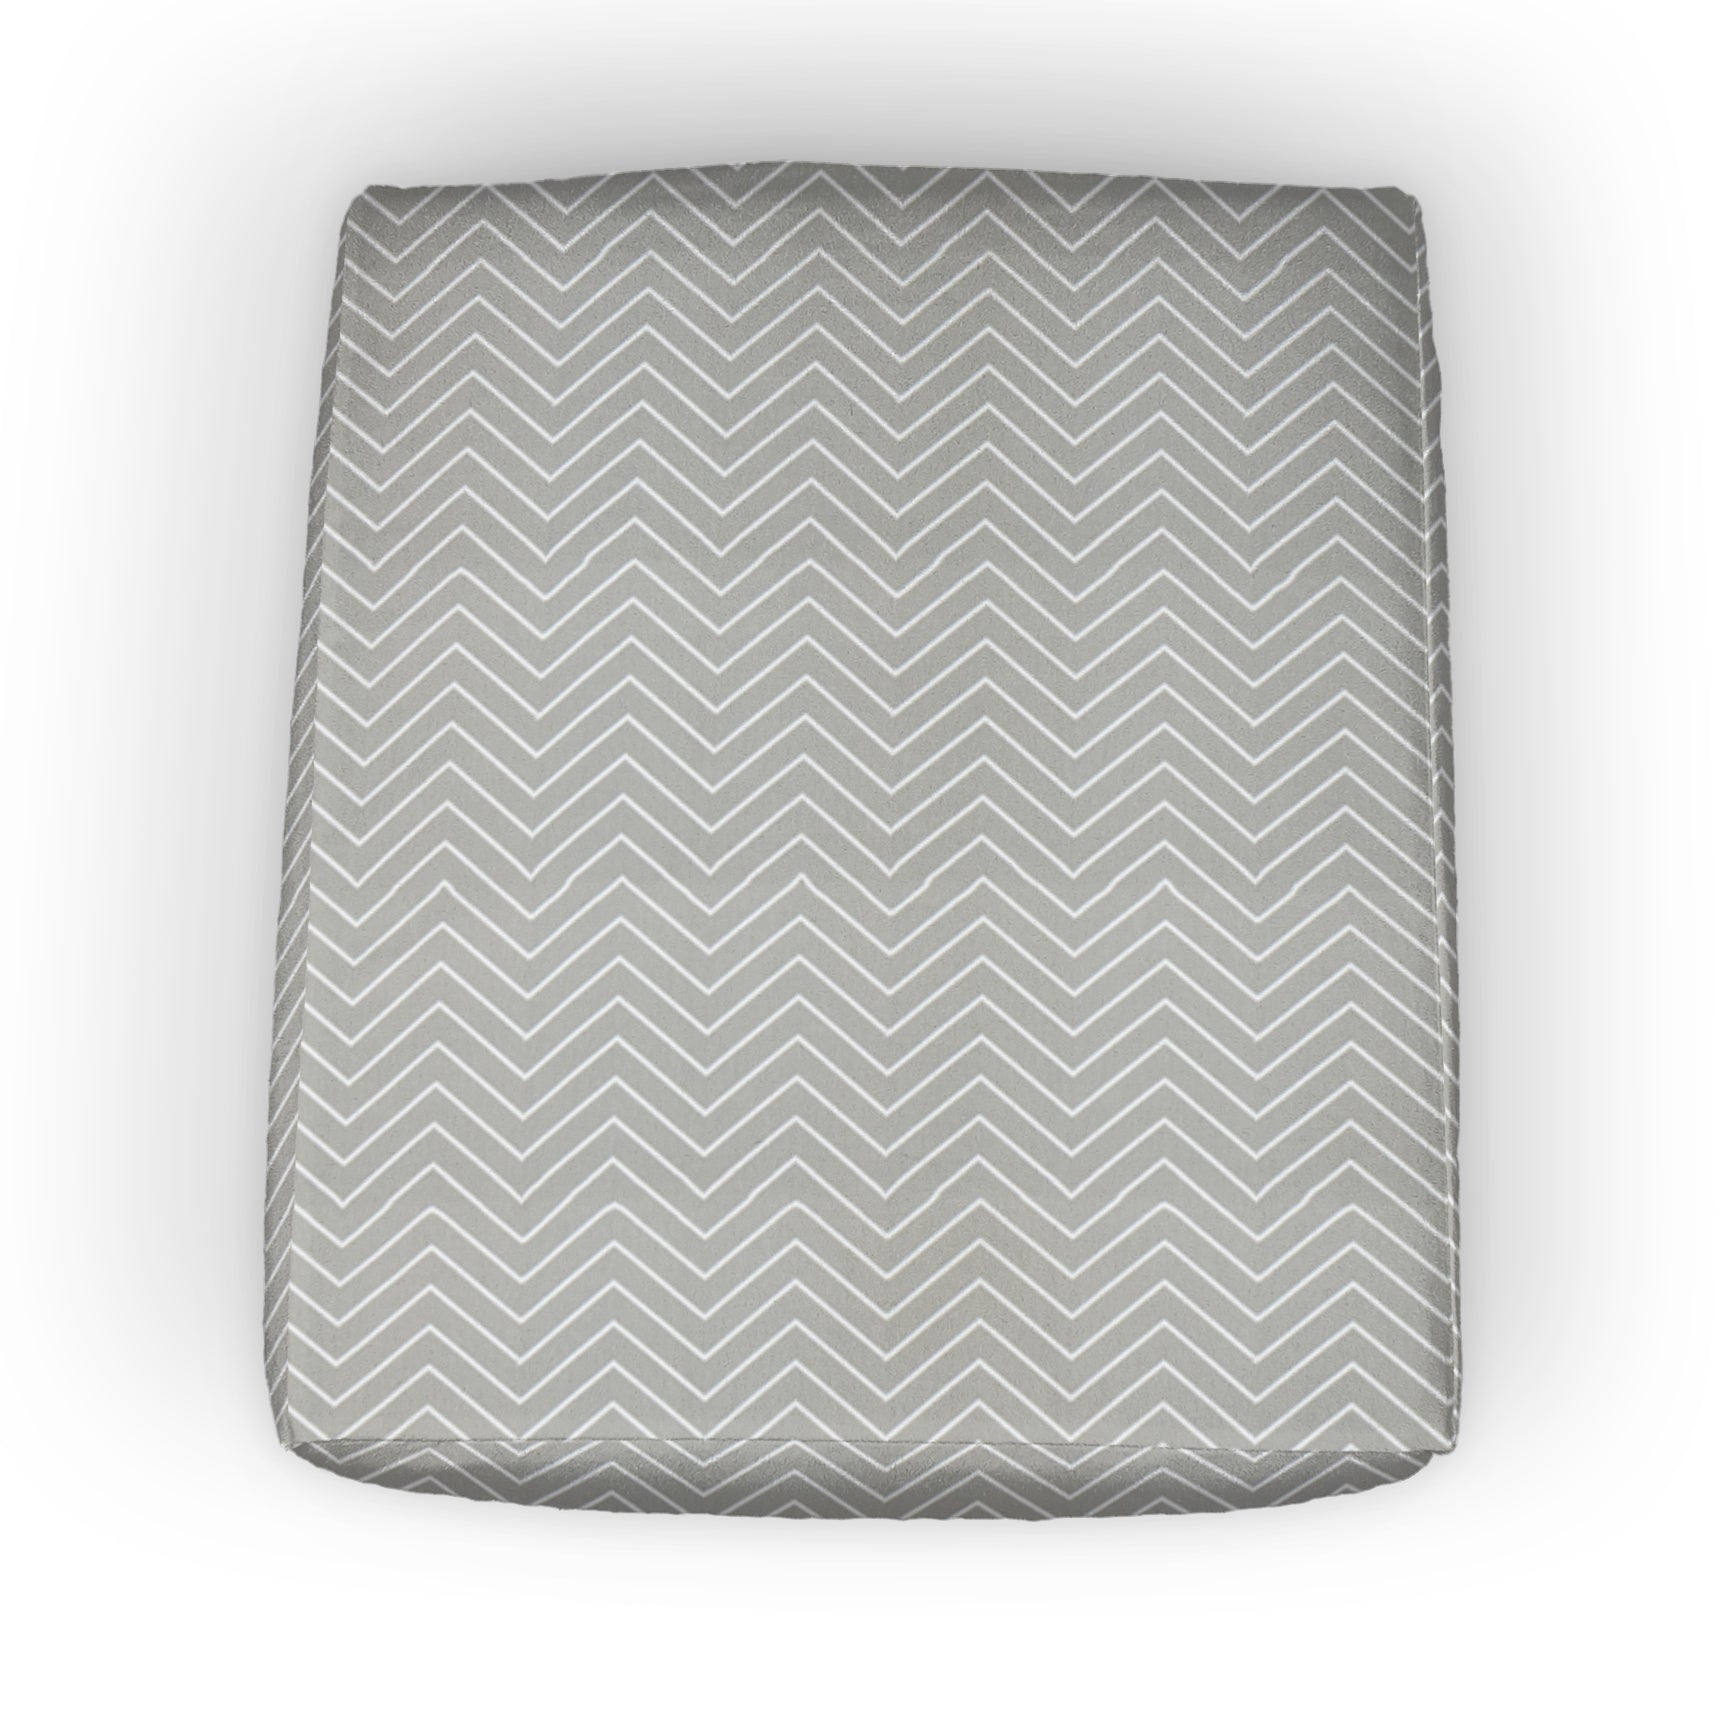 Chevron Custom Elastic Fitted Cushion Cover - Choice of Color